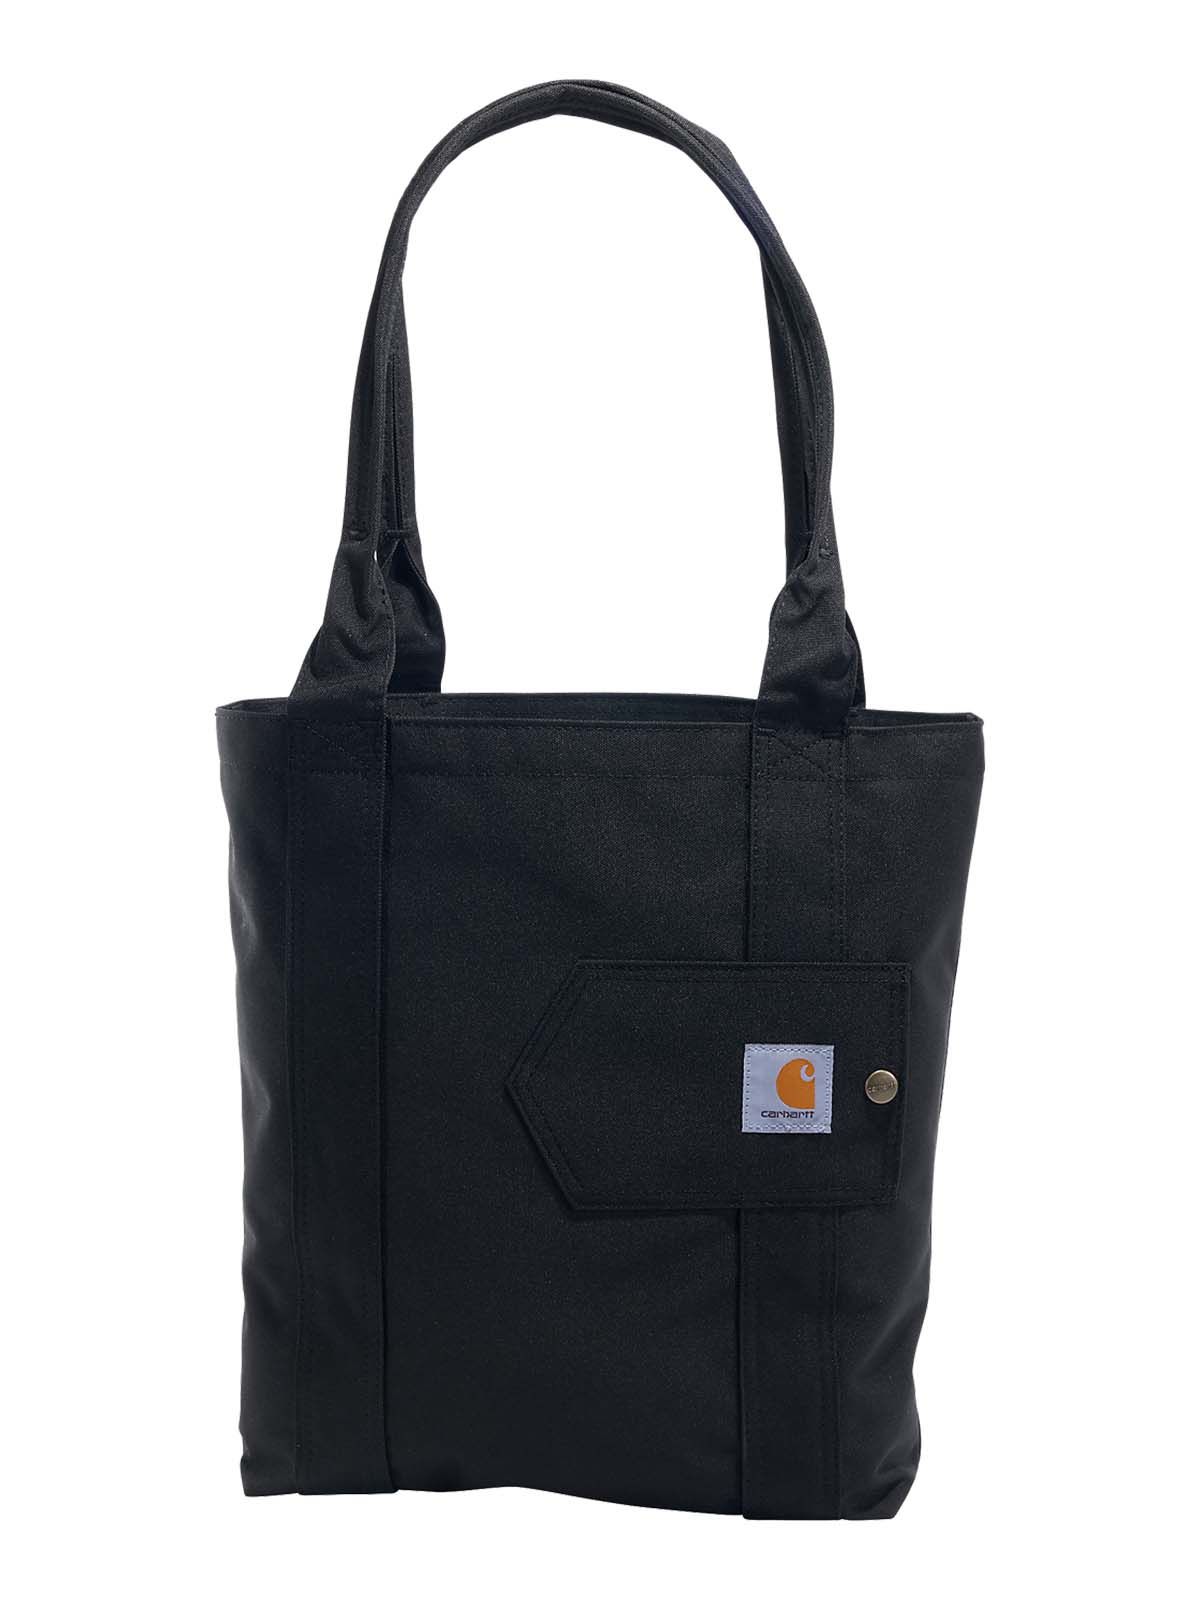 Carhartt Rework Tote Bag  Made from Carhartt Jacket, Pants, Overalls